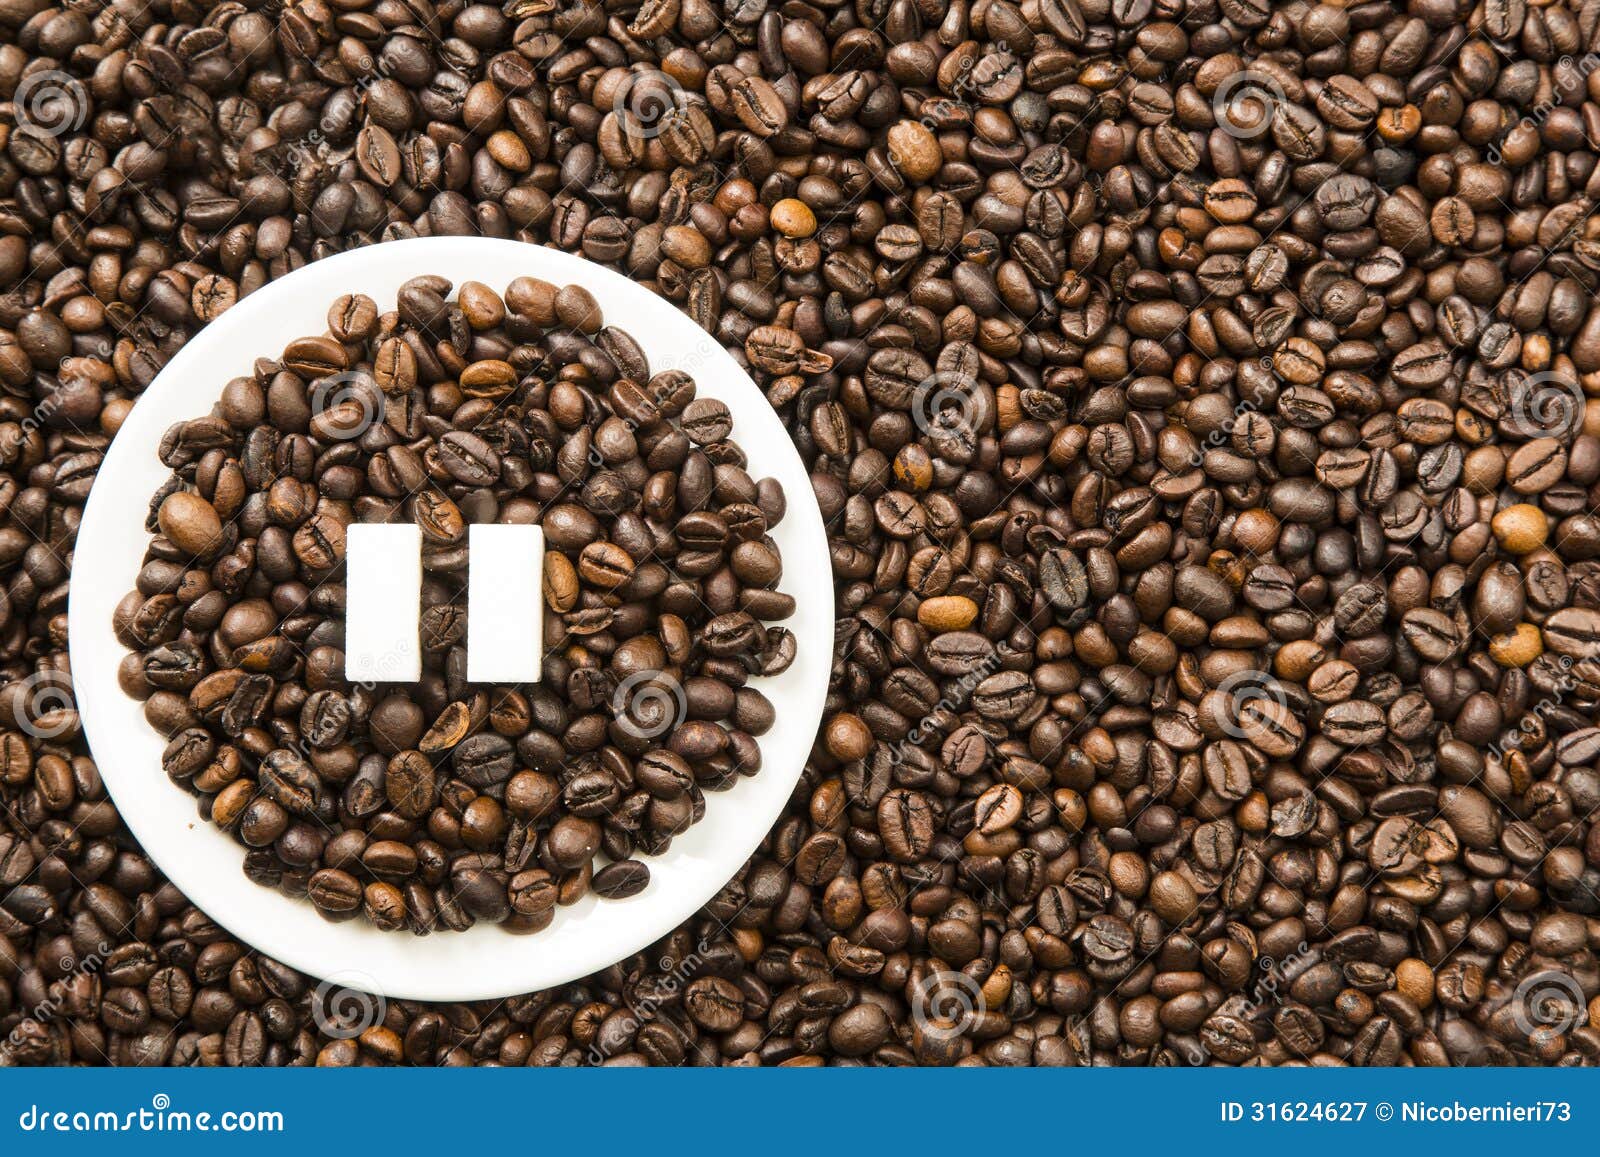  Coffee  Pause  stock image Image of beans ring symbol 